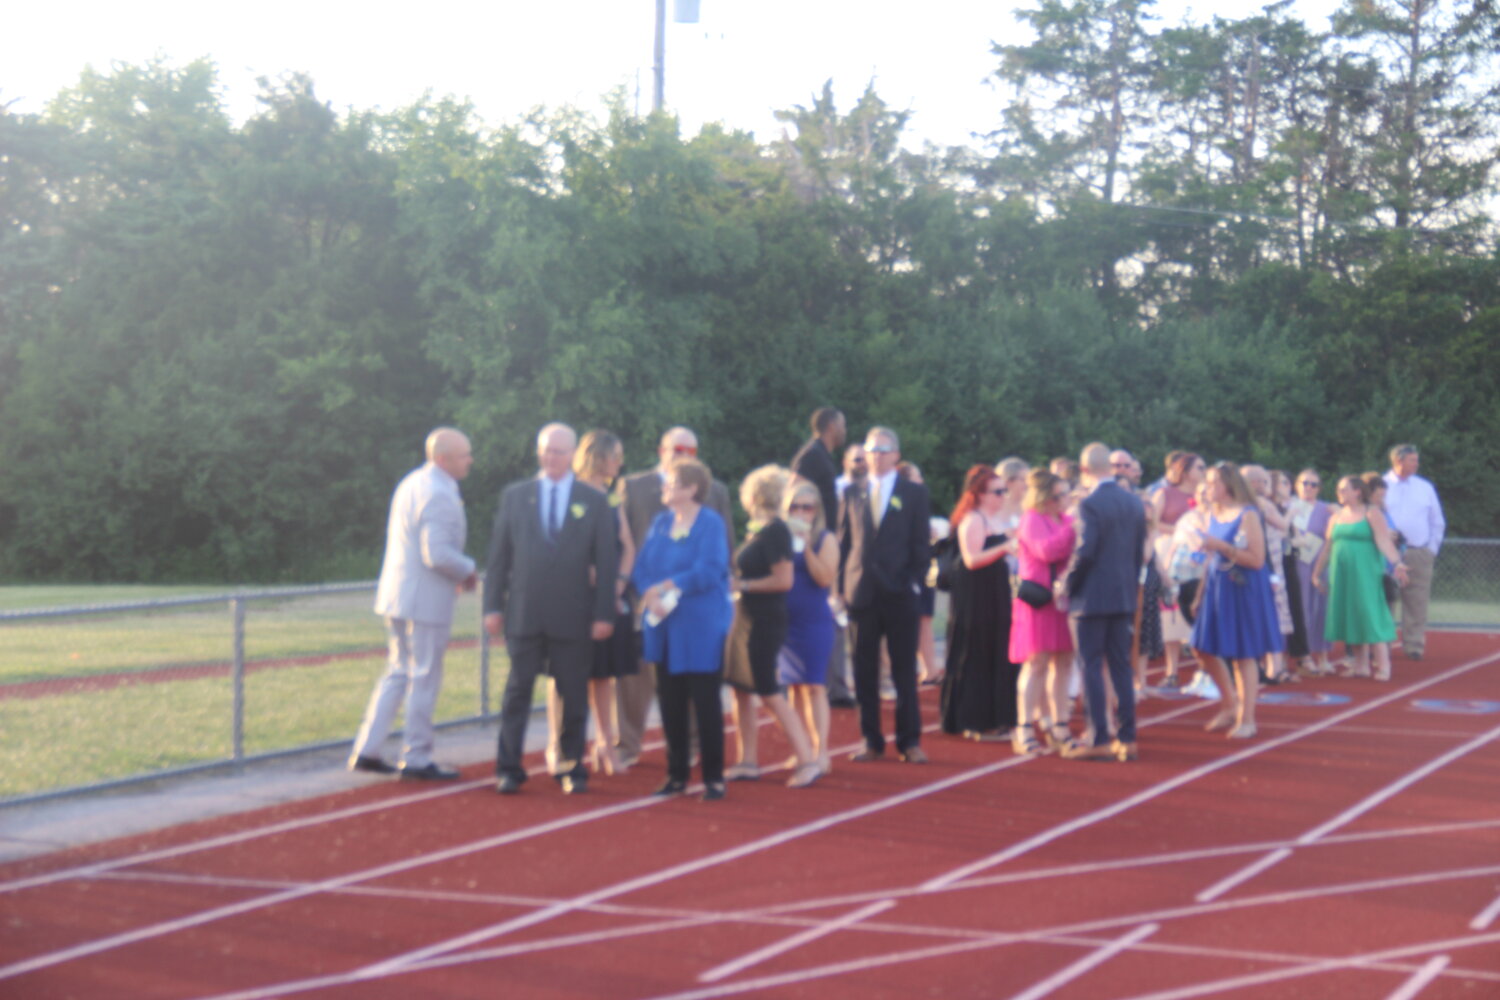 School district officials and teachers line up on the track prior to the start of the Wright City High School graduation ceremony on June 2.